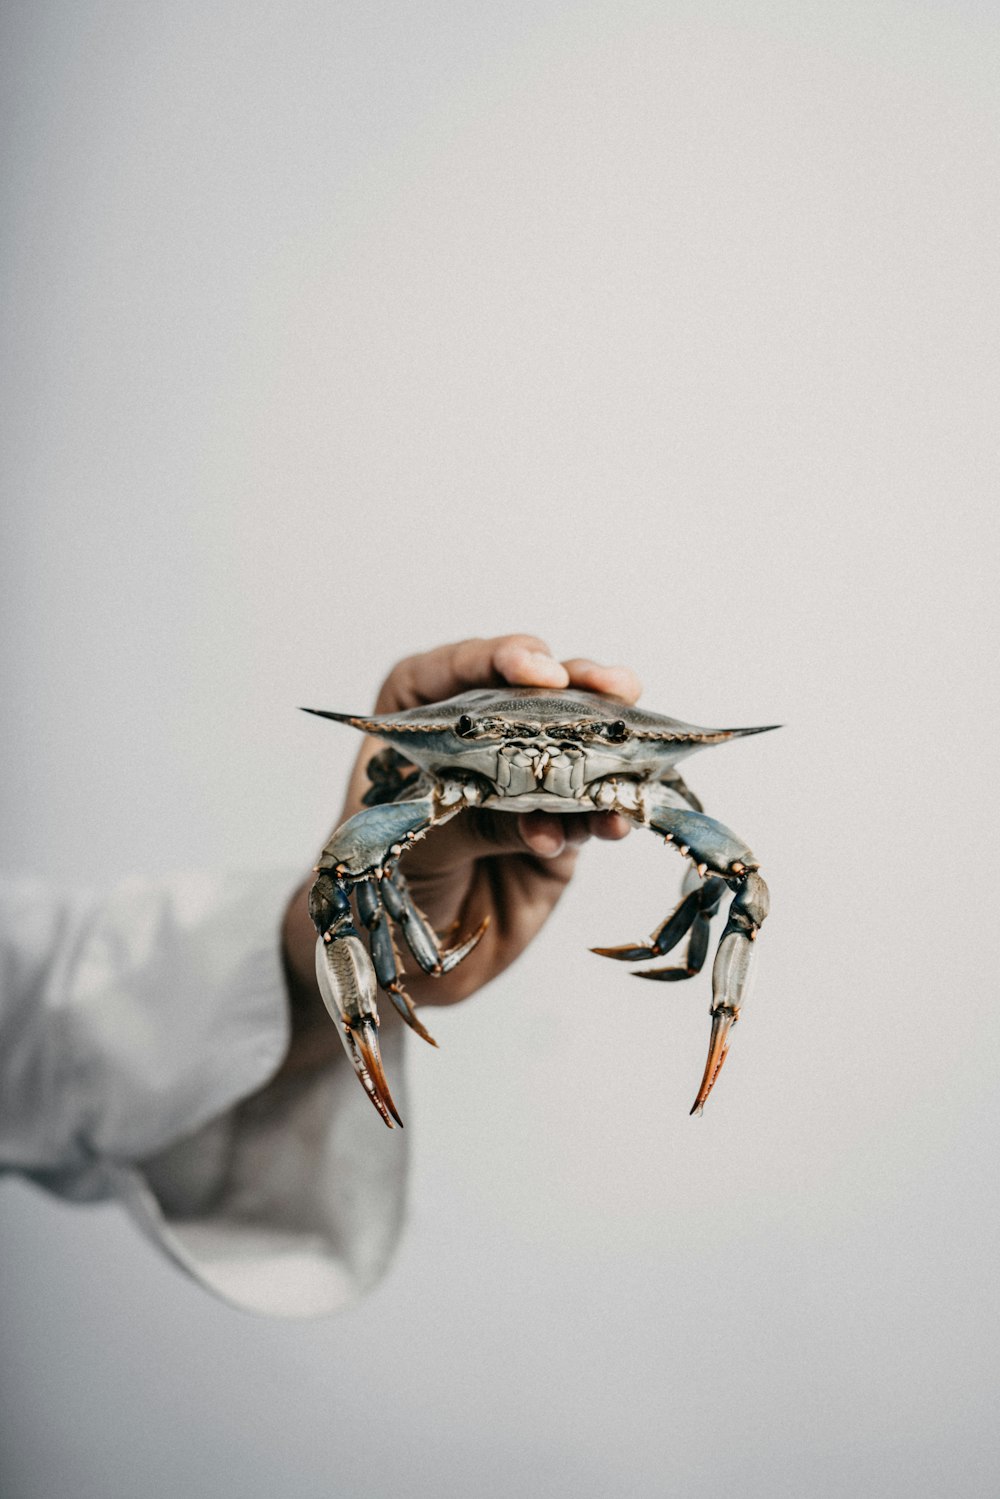 person holding brown and black crab